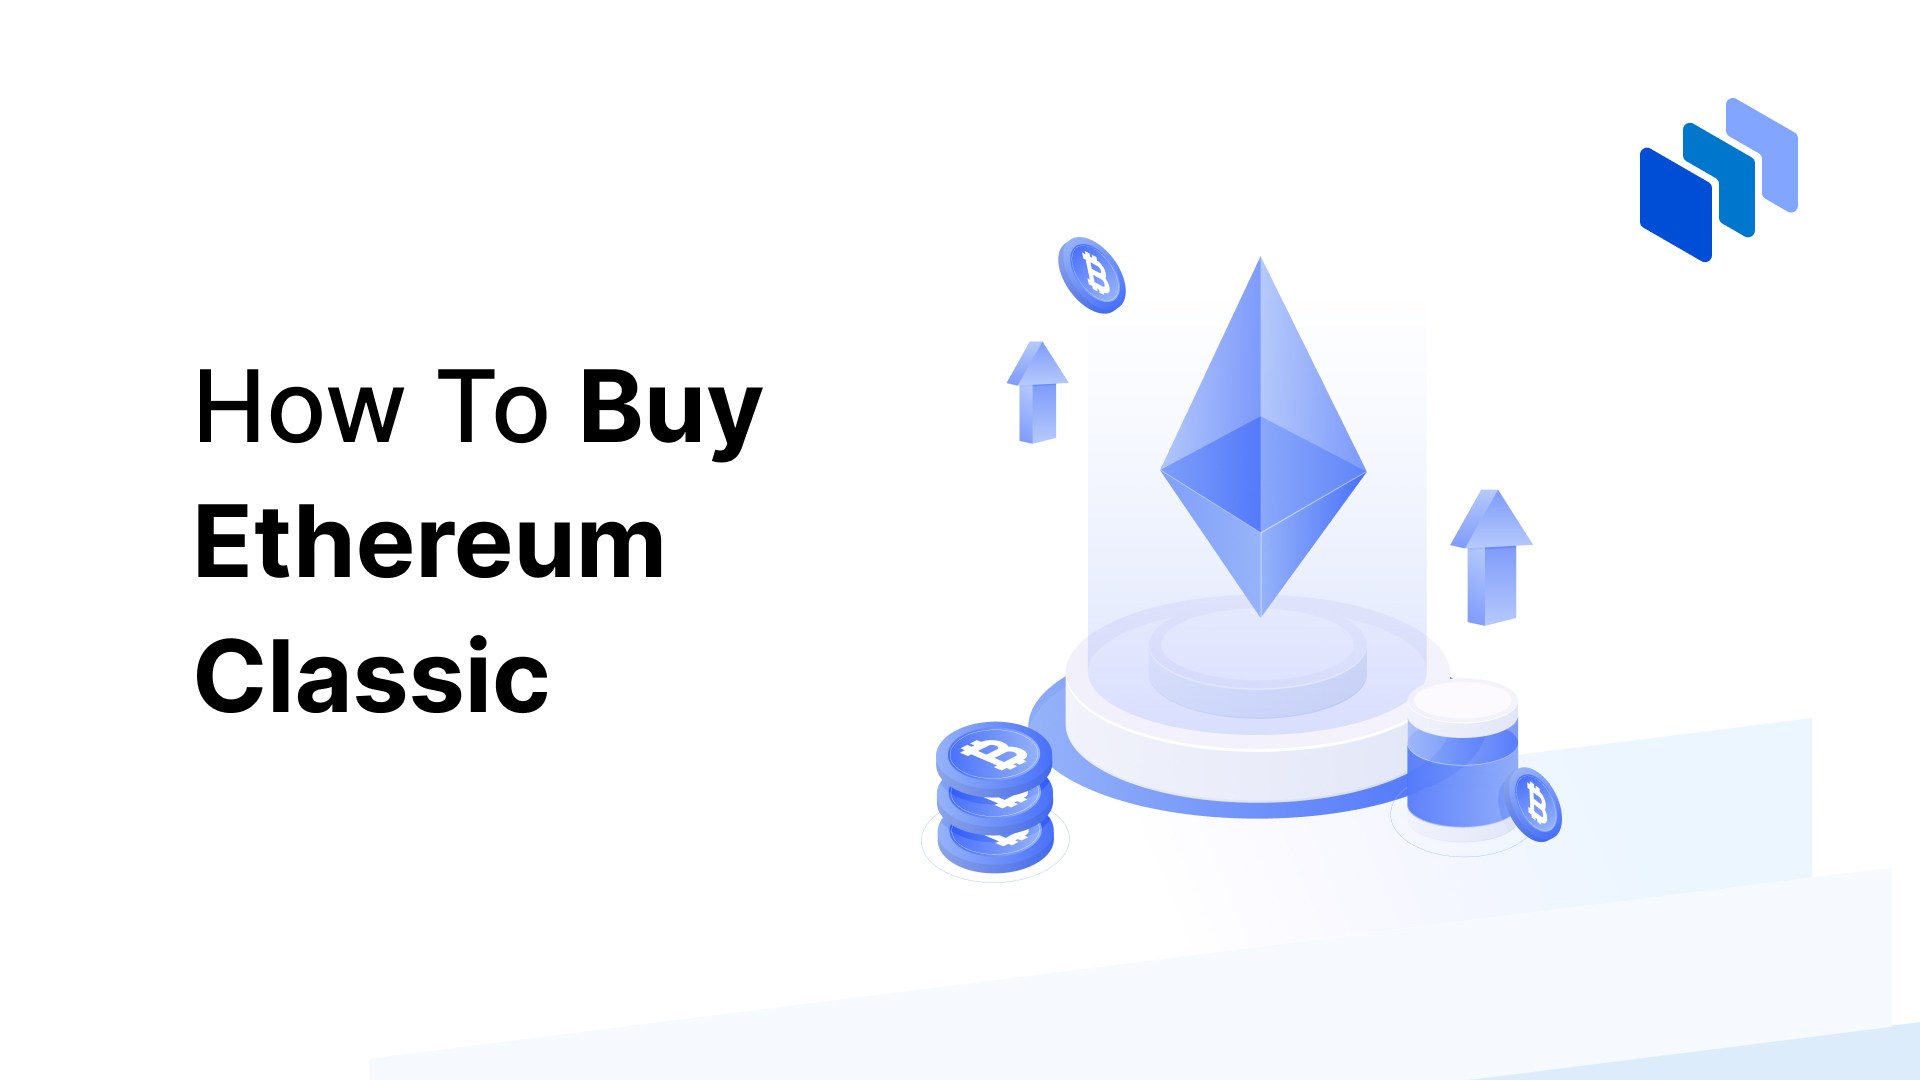 How To Buy Ethereum Classic